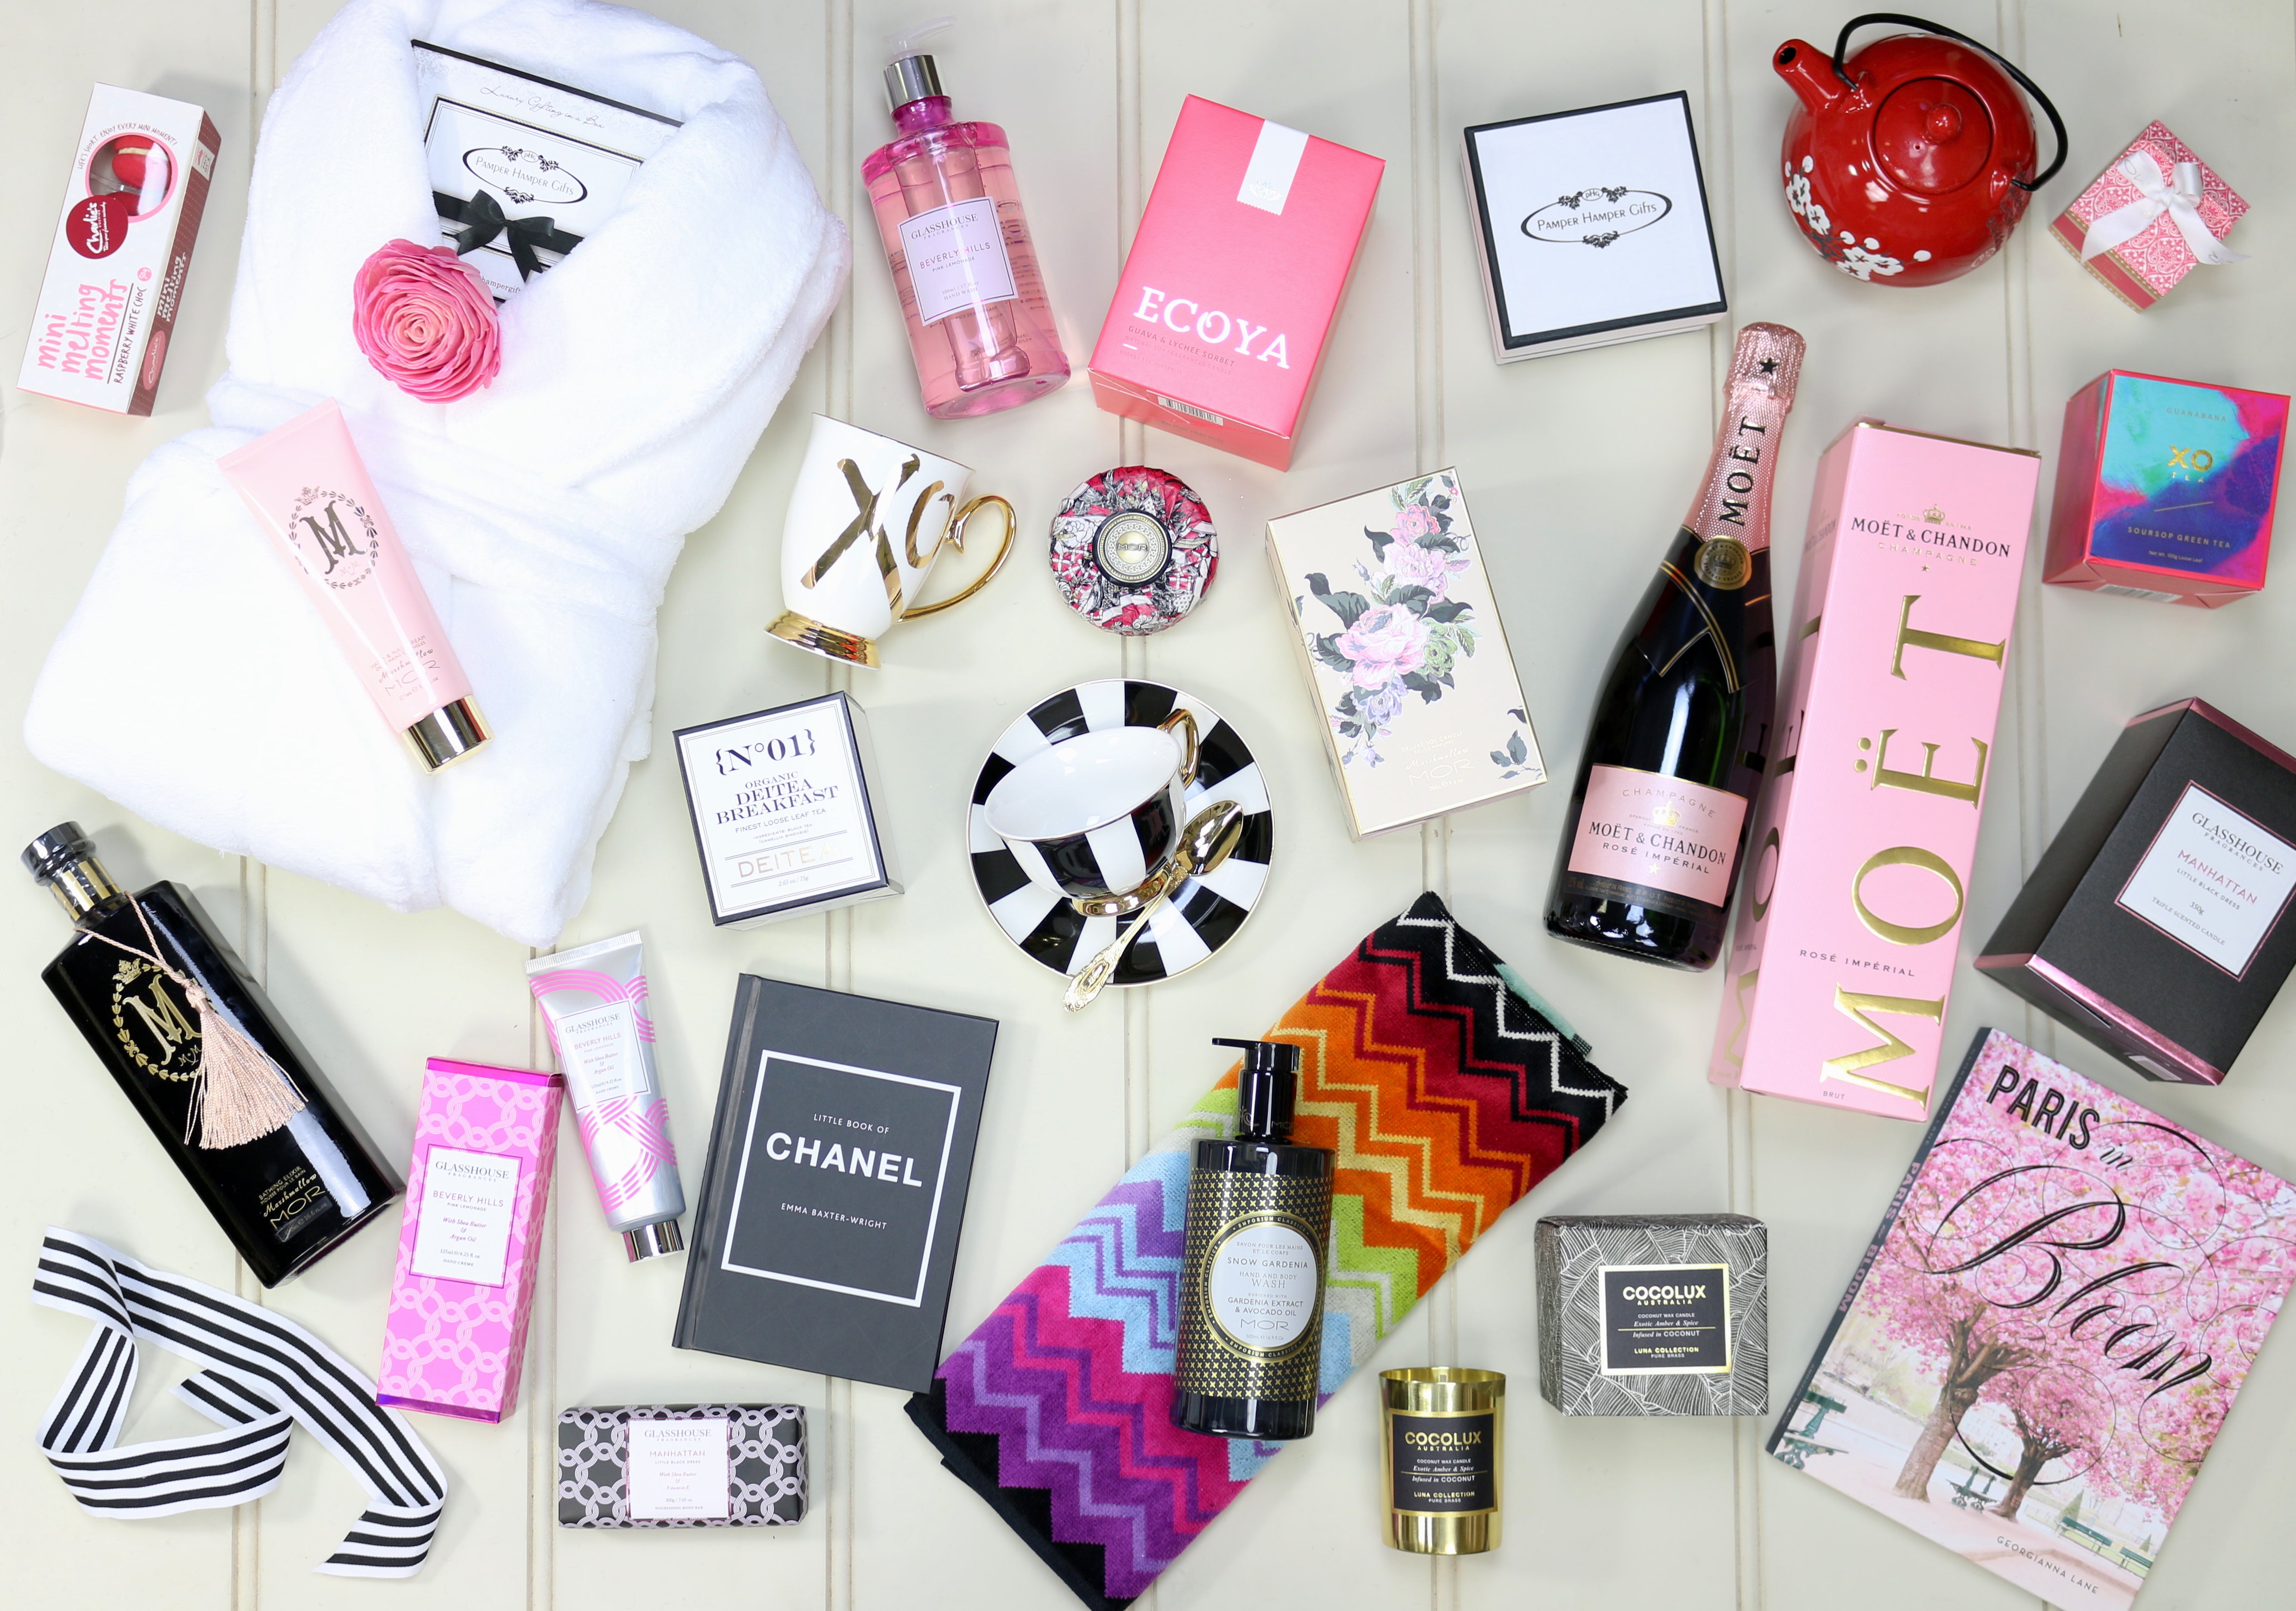 High-End gifts for womens day With Chocolates, Wine, Lip Balm And More |  Womens day gift ideas, Gifts, Luxury birthday gifts